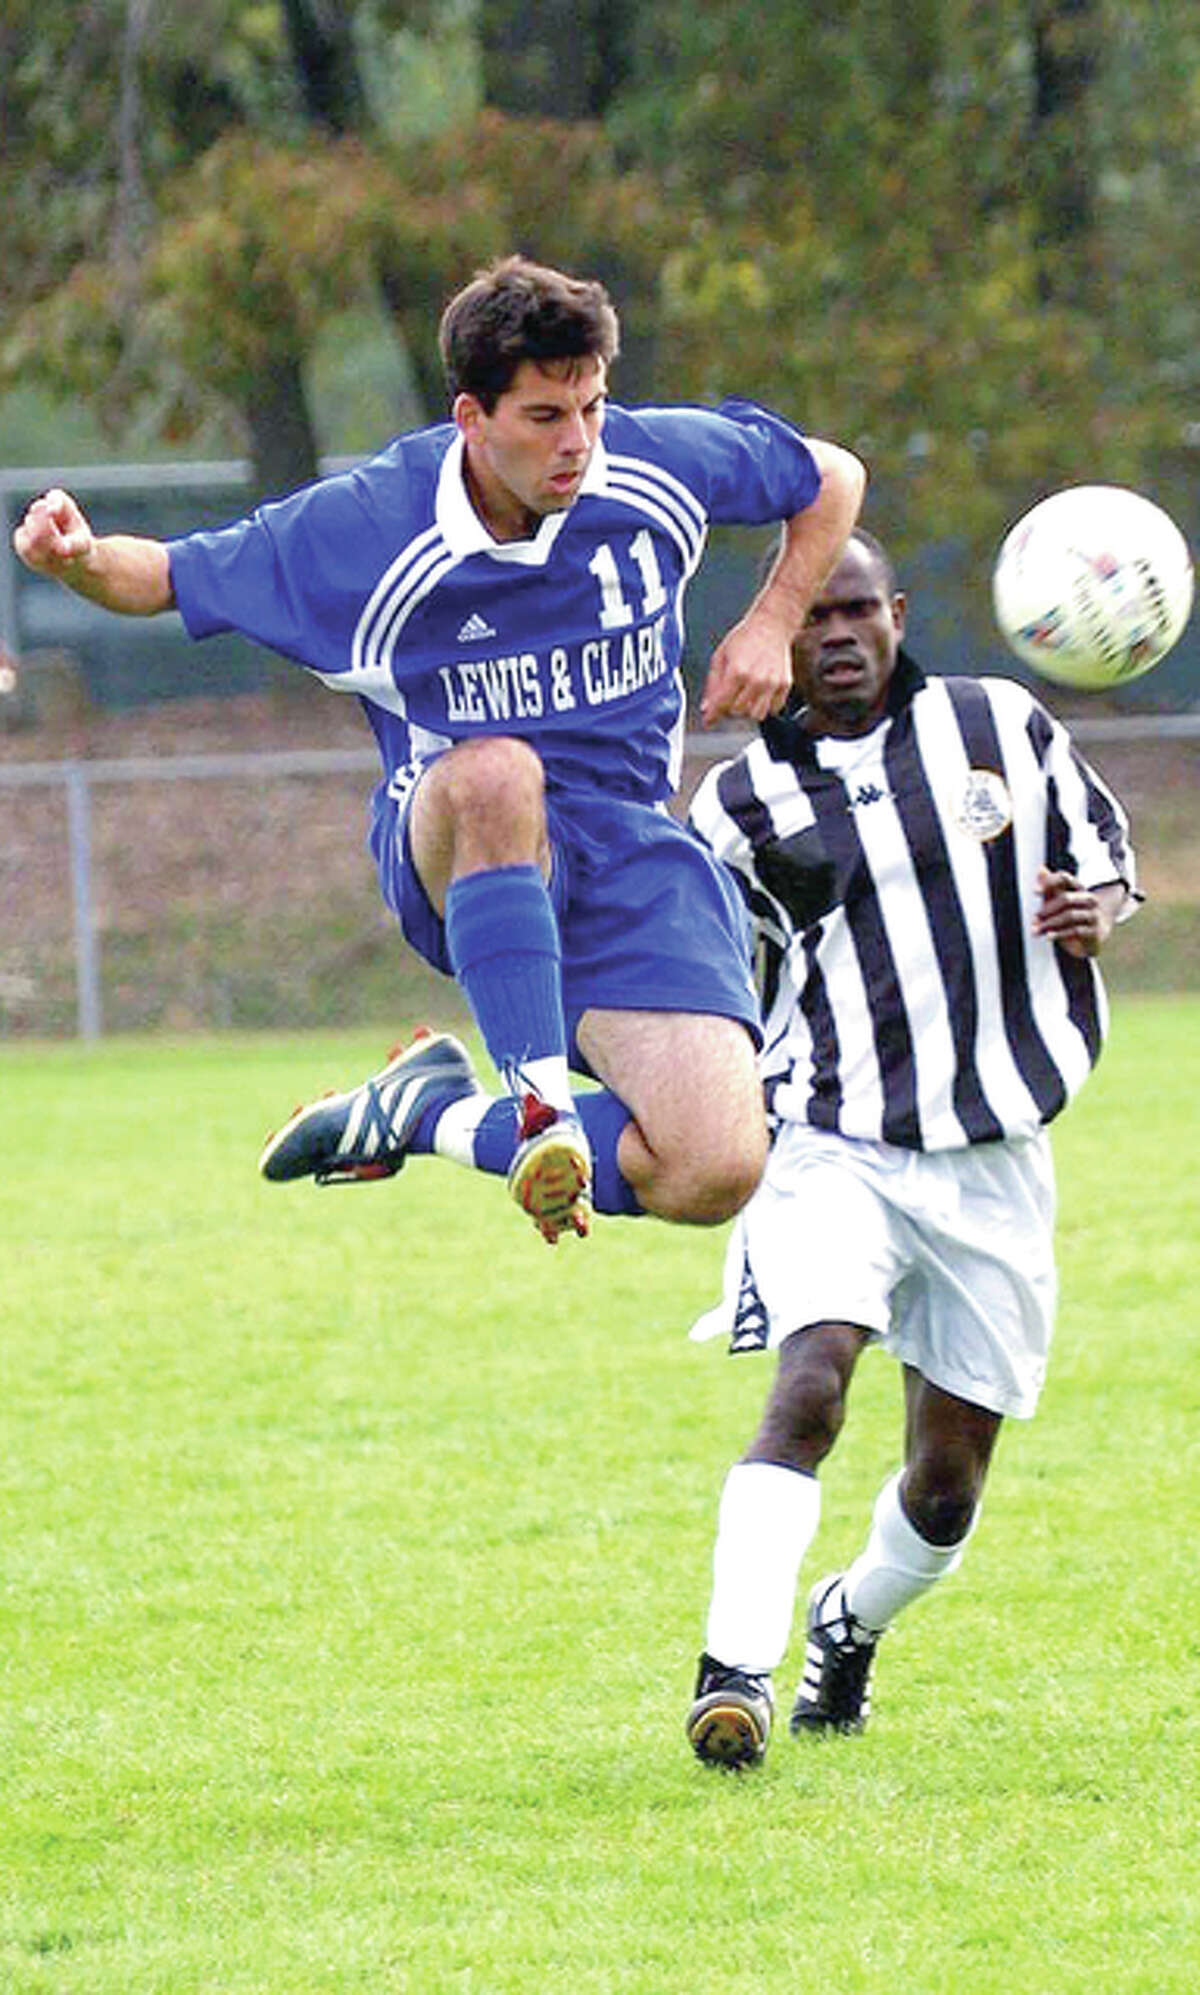 Blake Snyder (11) goes airborne to clear a ball during his days as a sweeper for the Lewis and Clark Community College soccer team.